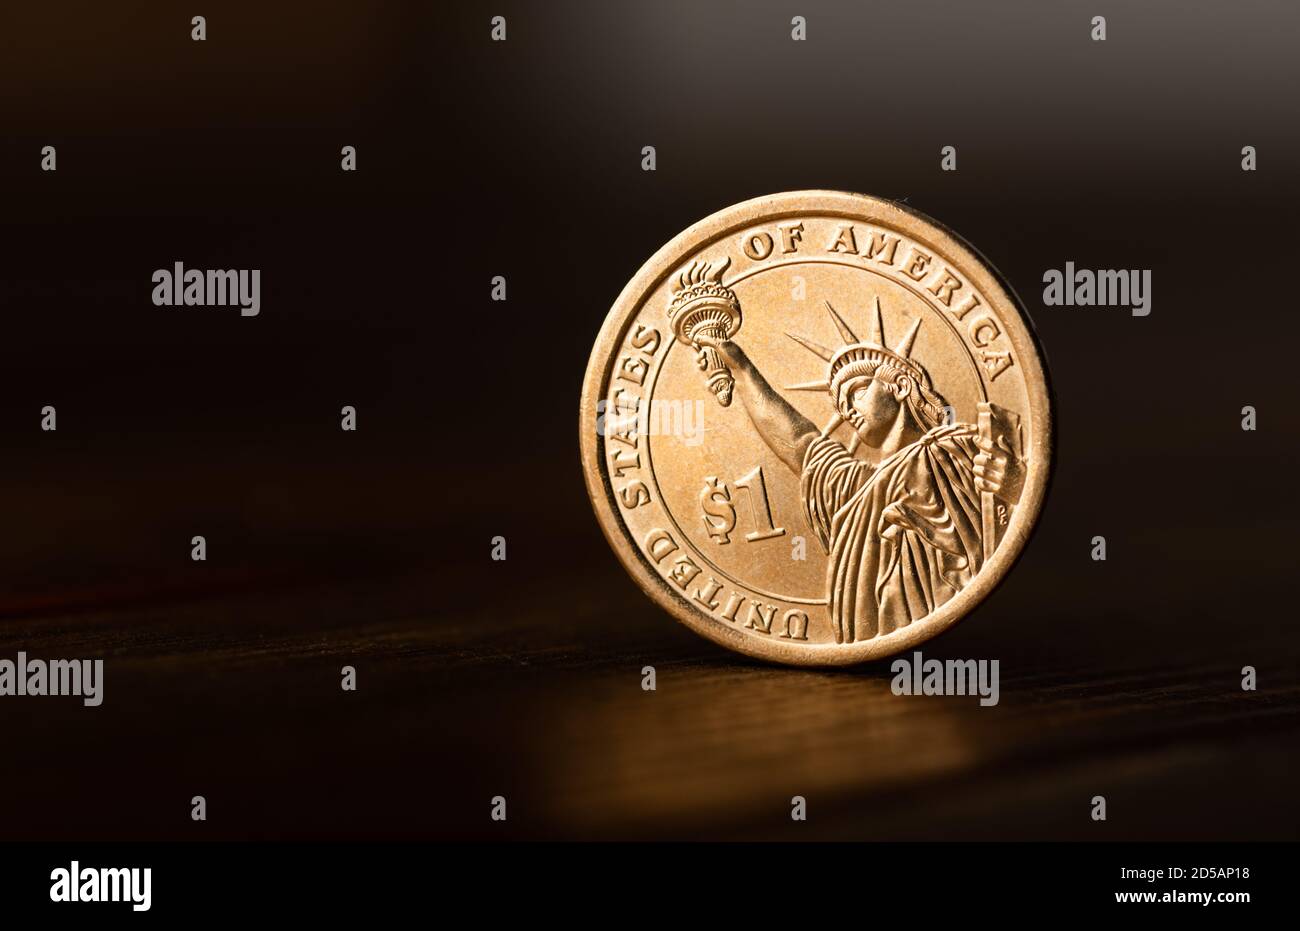 One dollar coin on desk Stock Photo